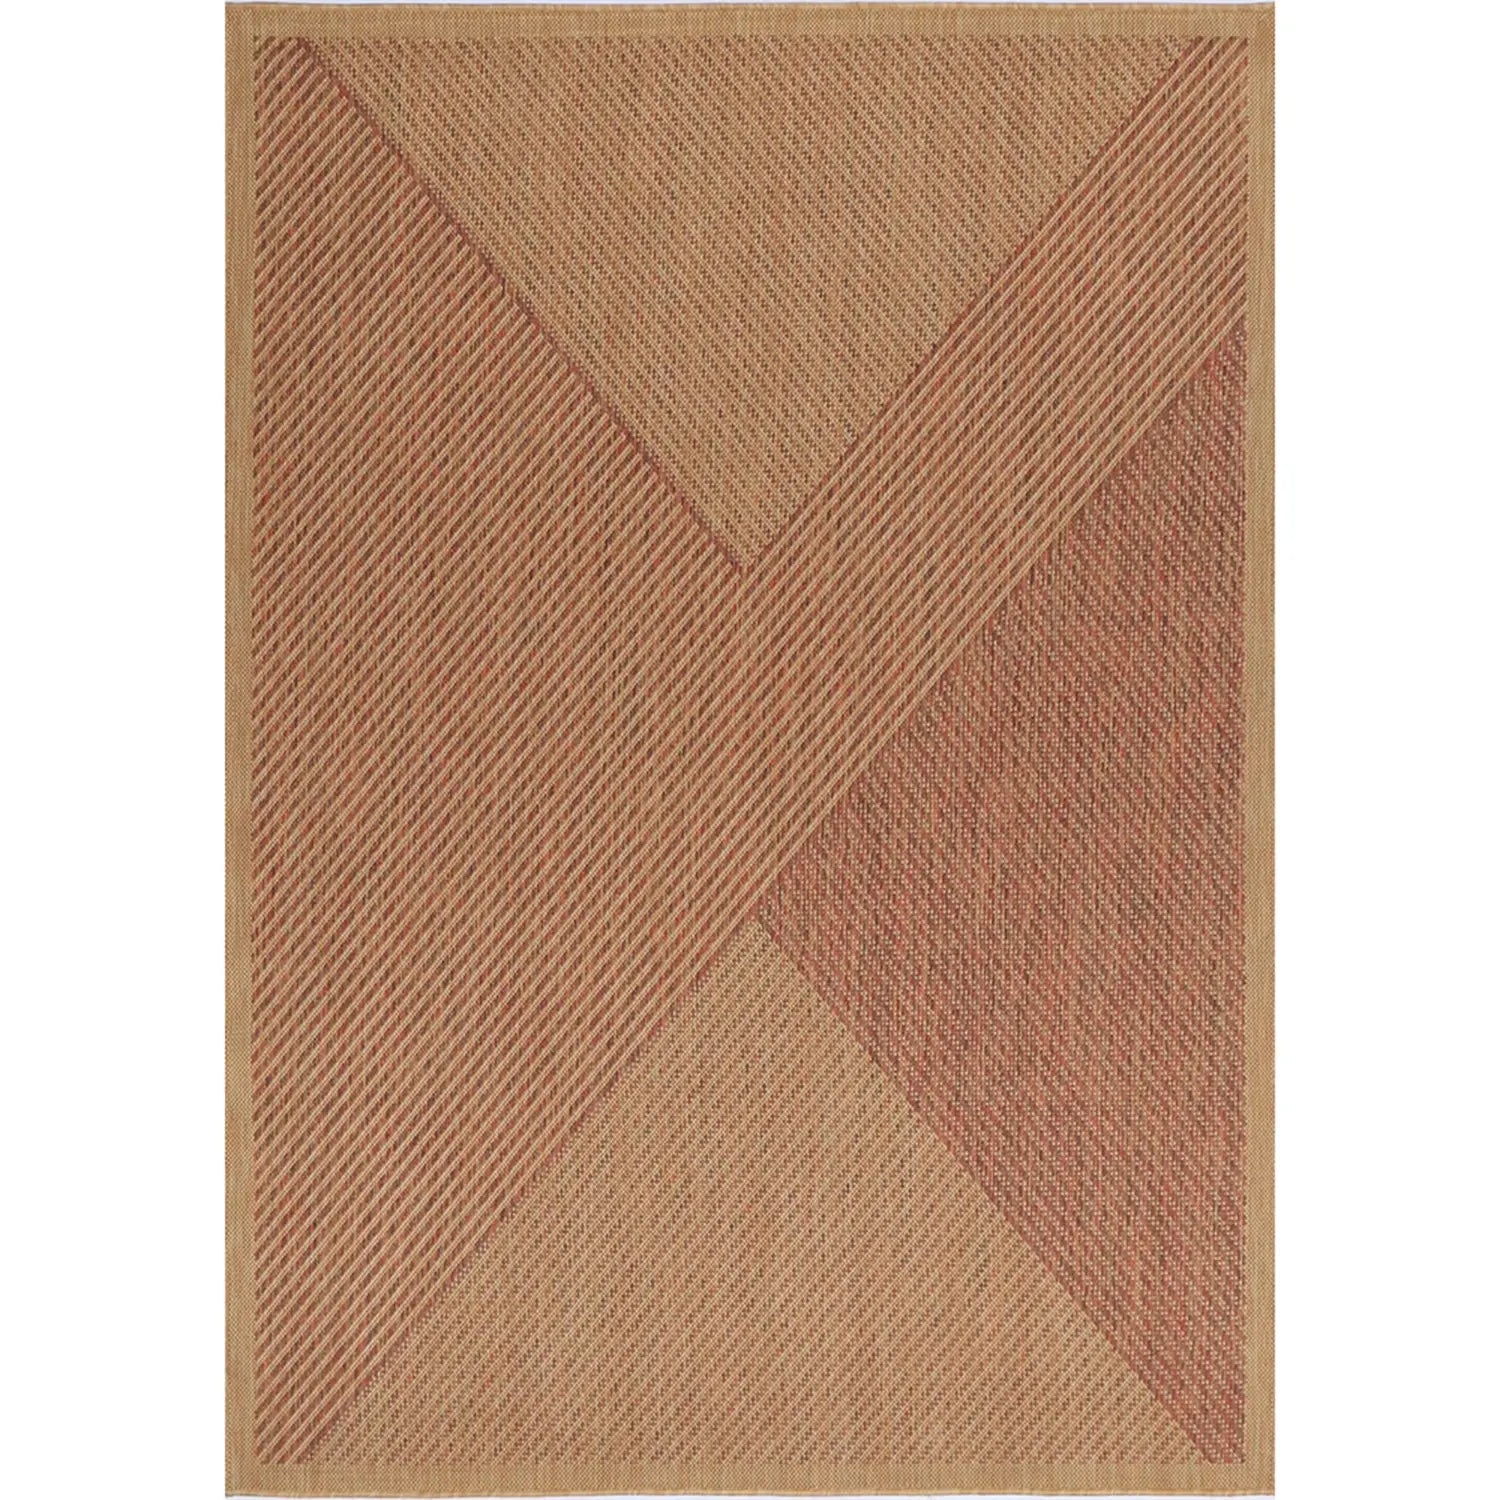 Elements Indoor/Outdoor Terracotta Shade Rug - Rugs - Rugs a Million